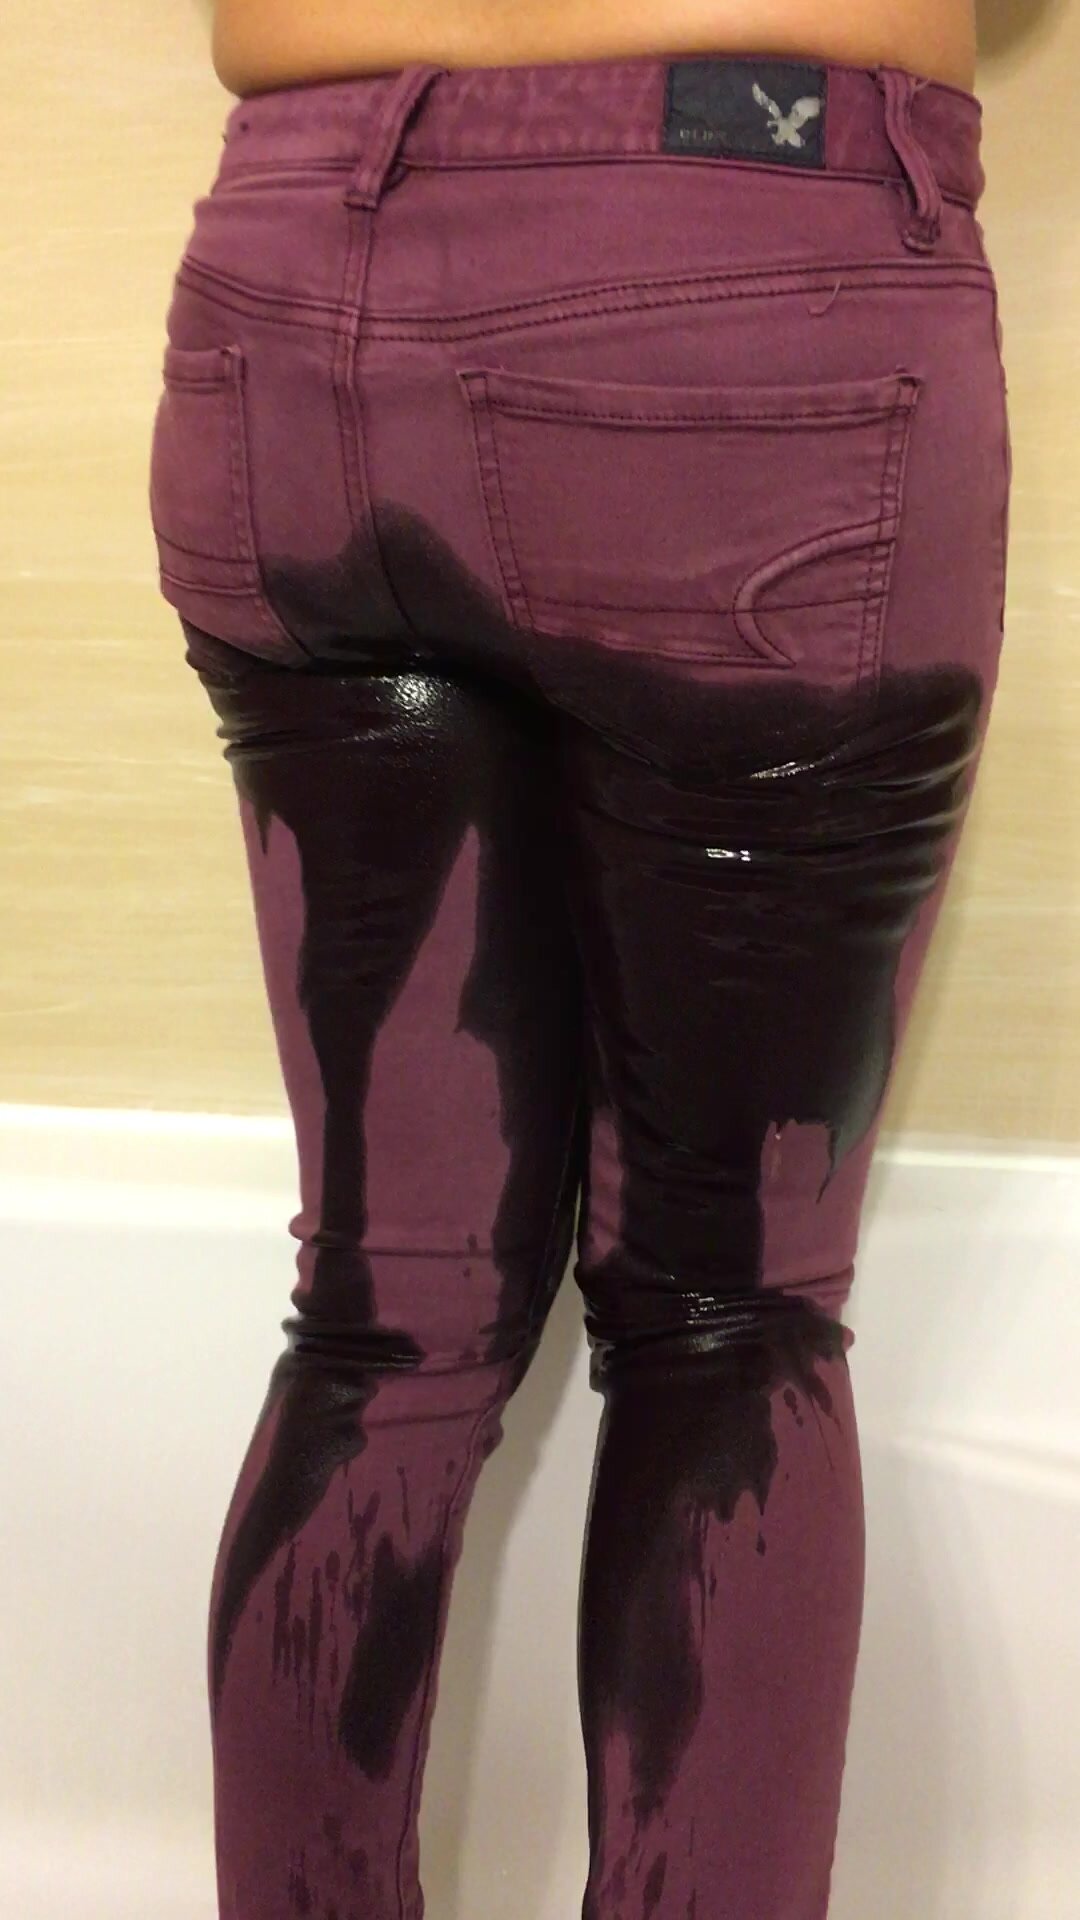 soaked my purple jeans